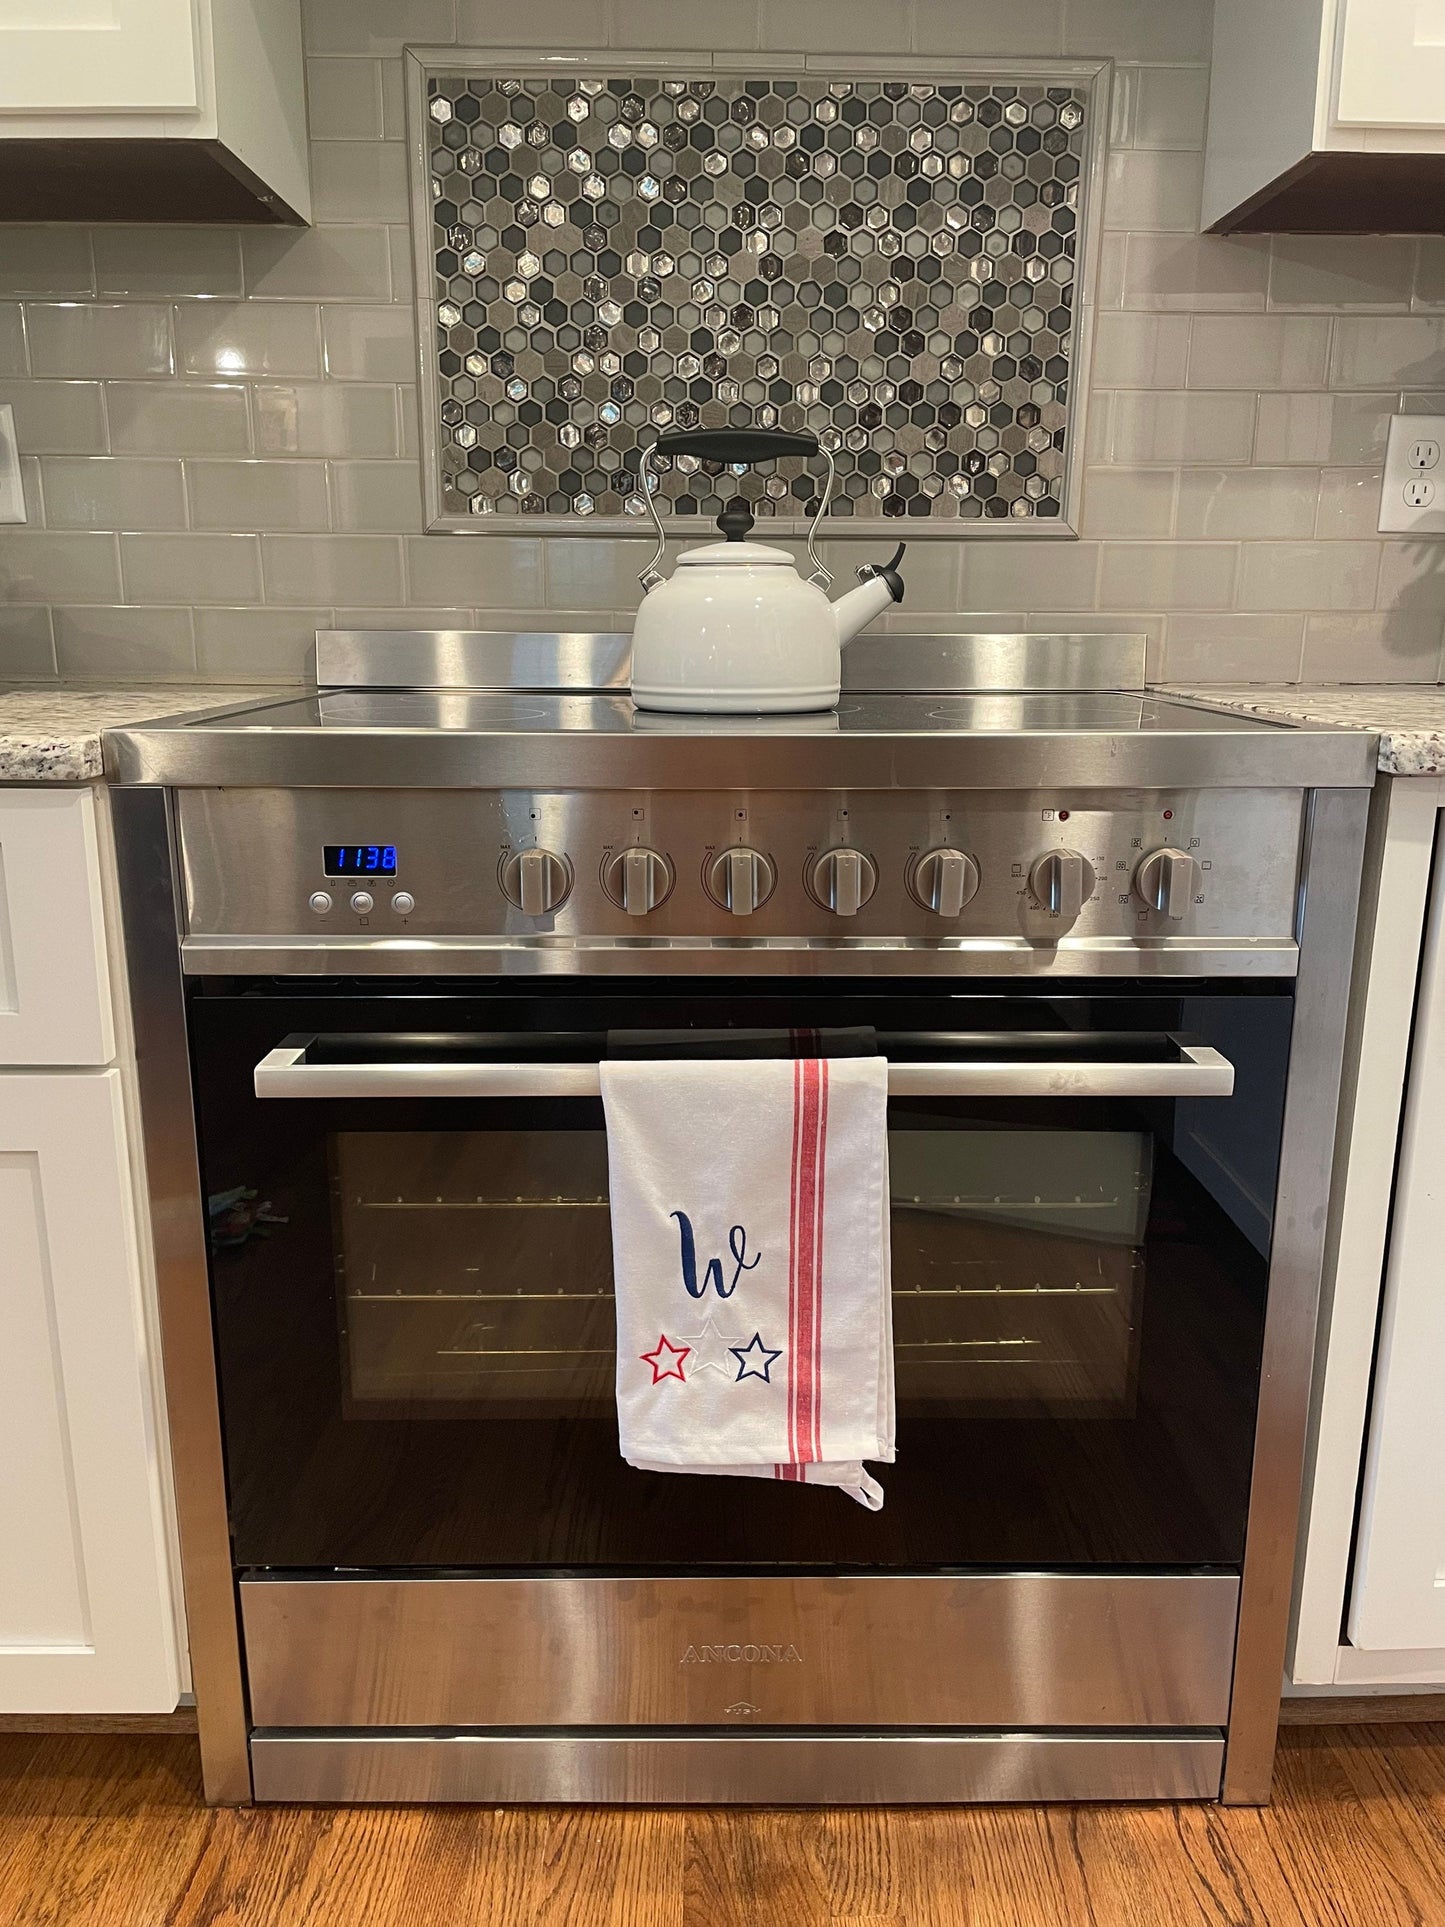 Patriotic Personalized Kitchen Towels -Cotton- Embroidered